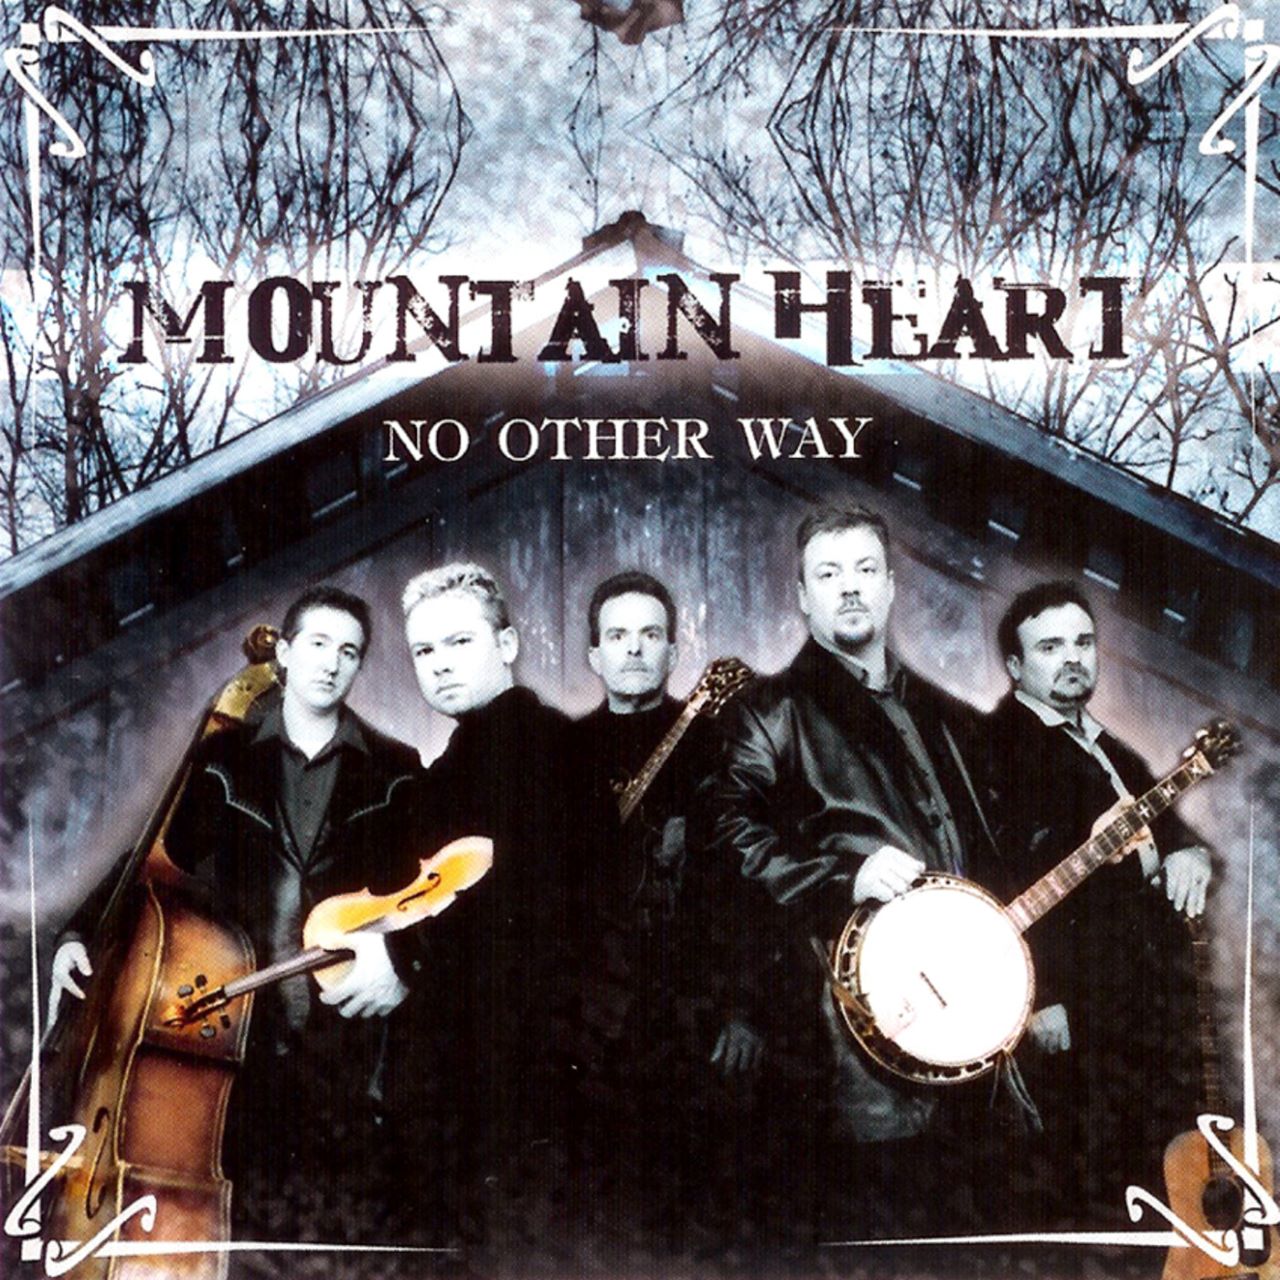 Mountain Heart - No Other Way cover album